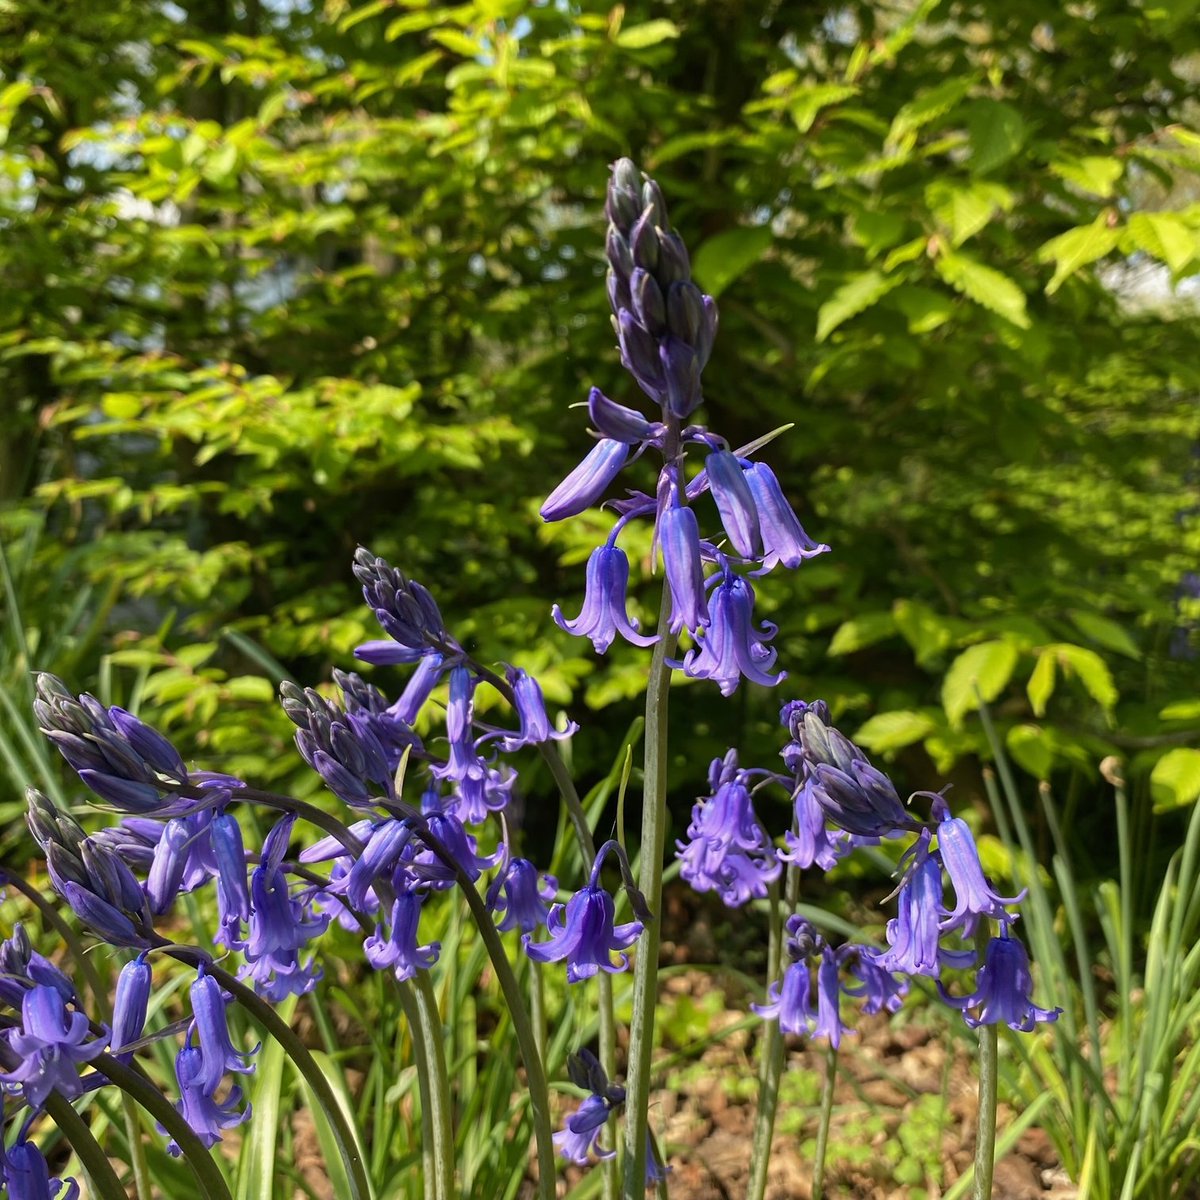 It feels like a fairy glen in our Wilderness!🧚‍♀️
The bluebells are looking beautiful, tucked along hedgerows and in shady garden compartments🌸🌳🌼
#spring #bluebells #garden #gardens #nature #wellbeing #flowers #RHSPartnerGarden #RHSPartnerGardens #Richmond #London #VisitRichmond